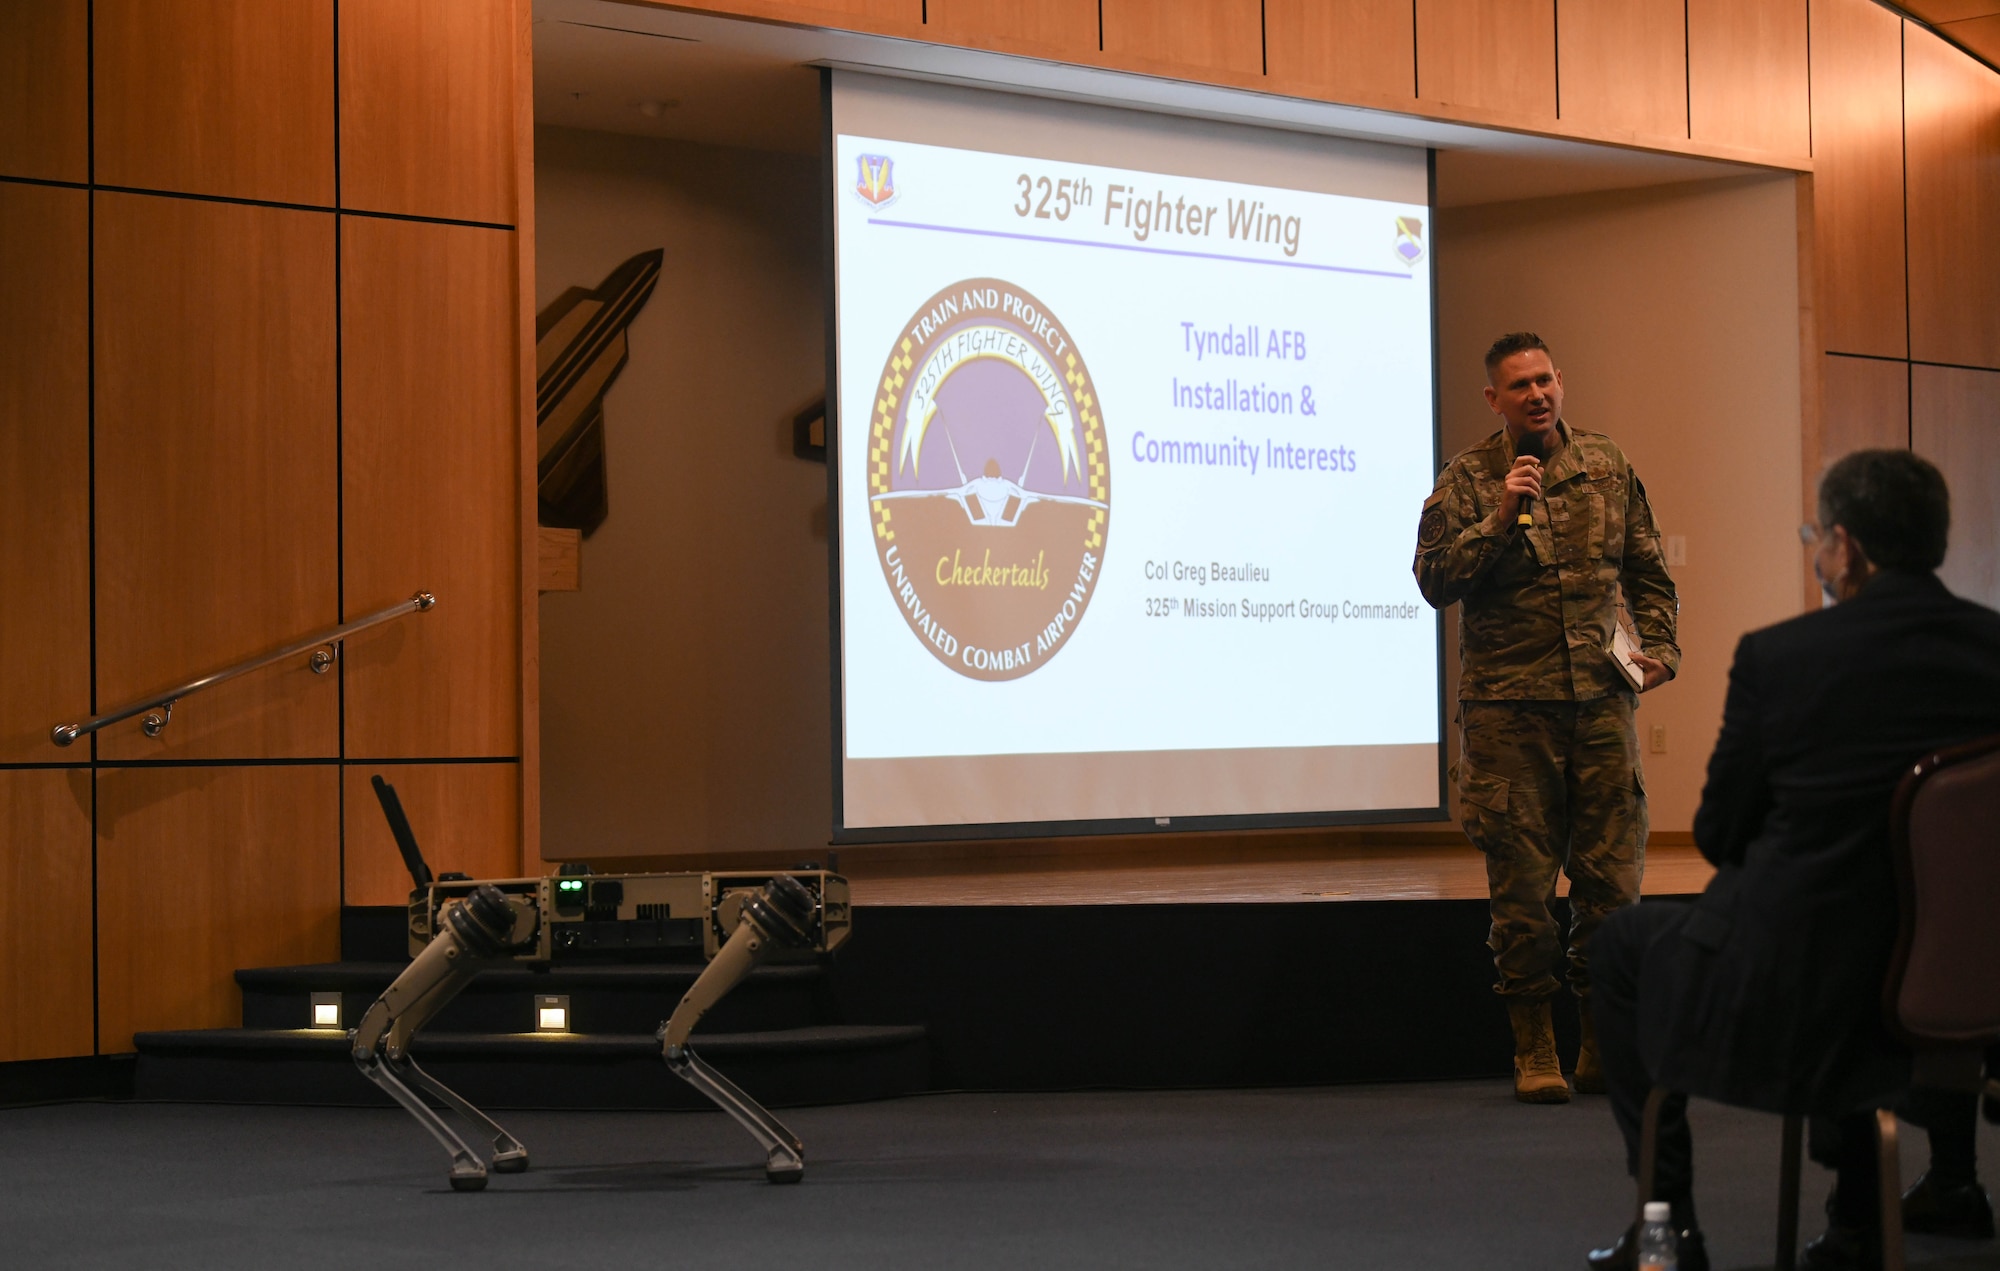 U.S. Air Force Col. Gregory Beaulieu, 325th Mission Support Group commander, speaks at a briefing at Tyndall Air Force Base, Florida, April 23, 2021. Leaders from the 325th Fighter Wing, First Air Force, and the Tyndall Program Management Office hosted a State of Tyndall update for local community leaders April 23 at Tyndall AFB. (U.S. Air Force photo by Airman 1st Class Anabel Del Valle)